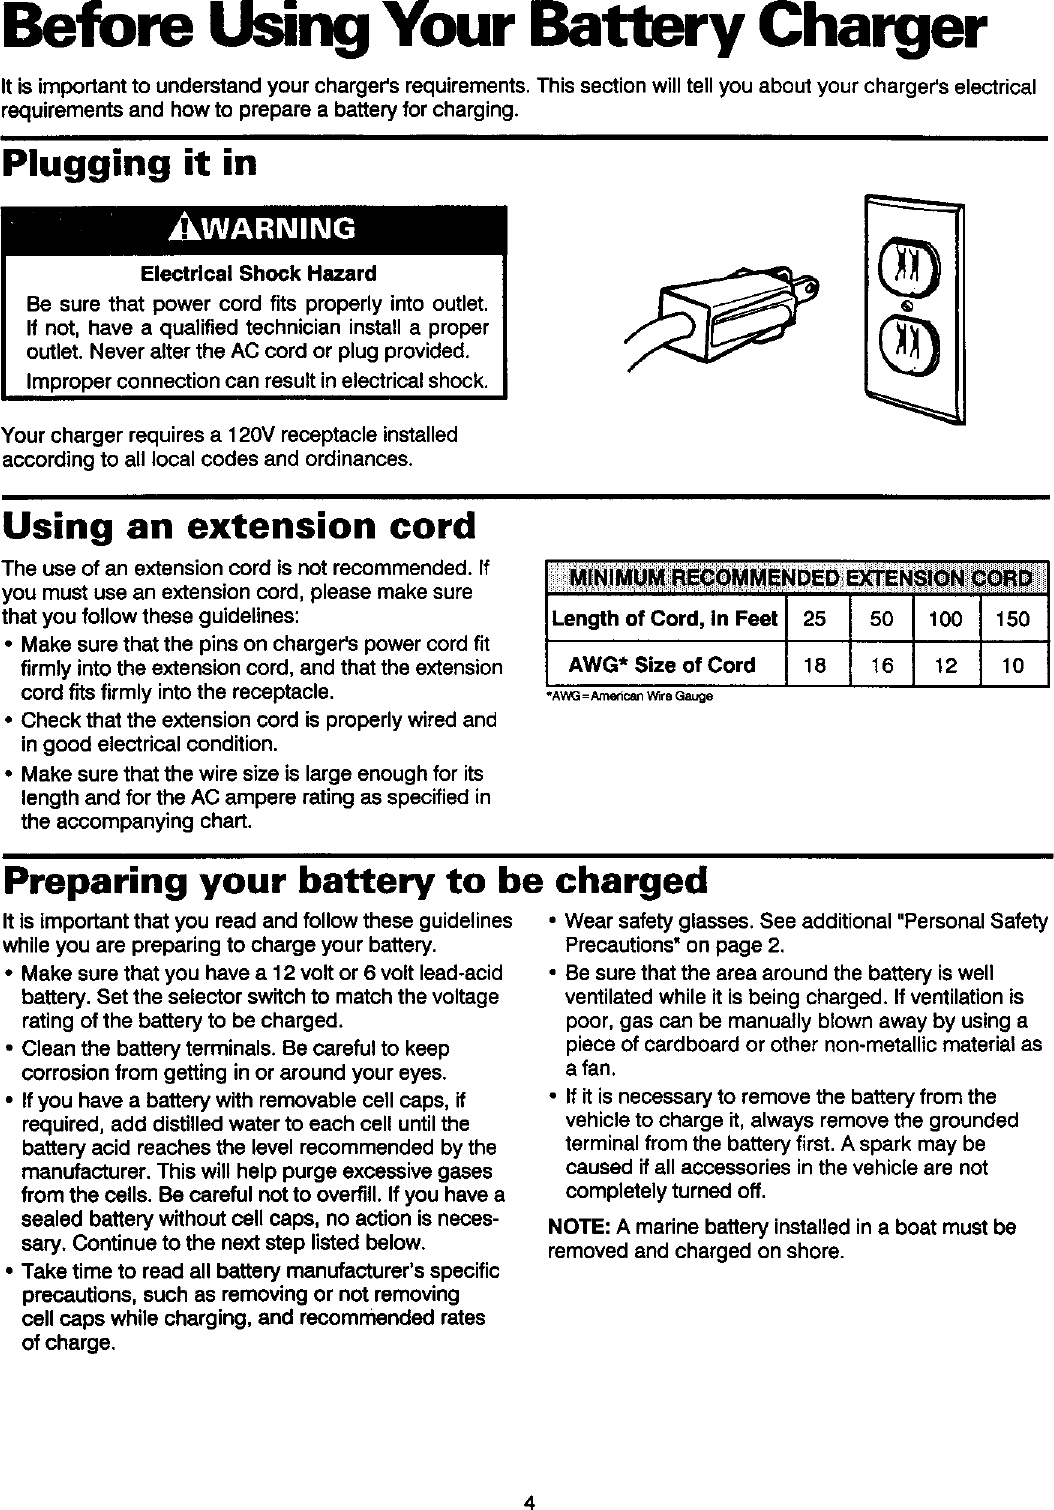 Page 5 of 12 - Diehard 20071312 User Manual  BATTERY CHARGER - Manuals And Guides L0305326